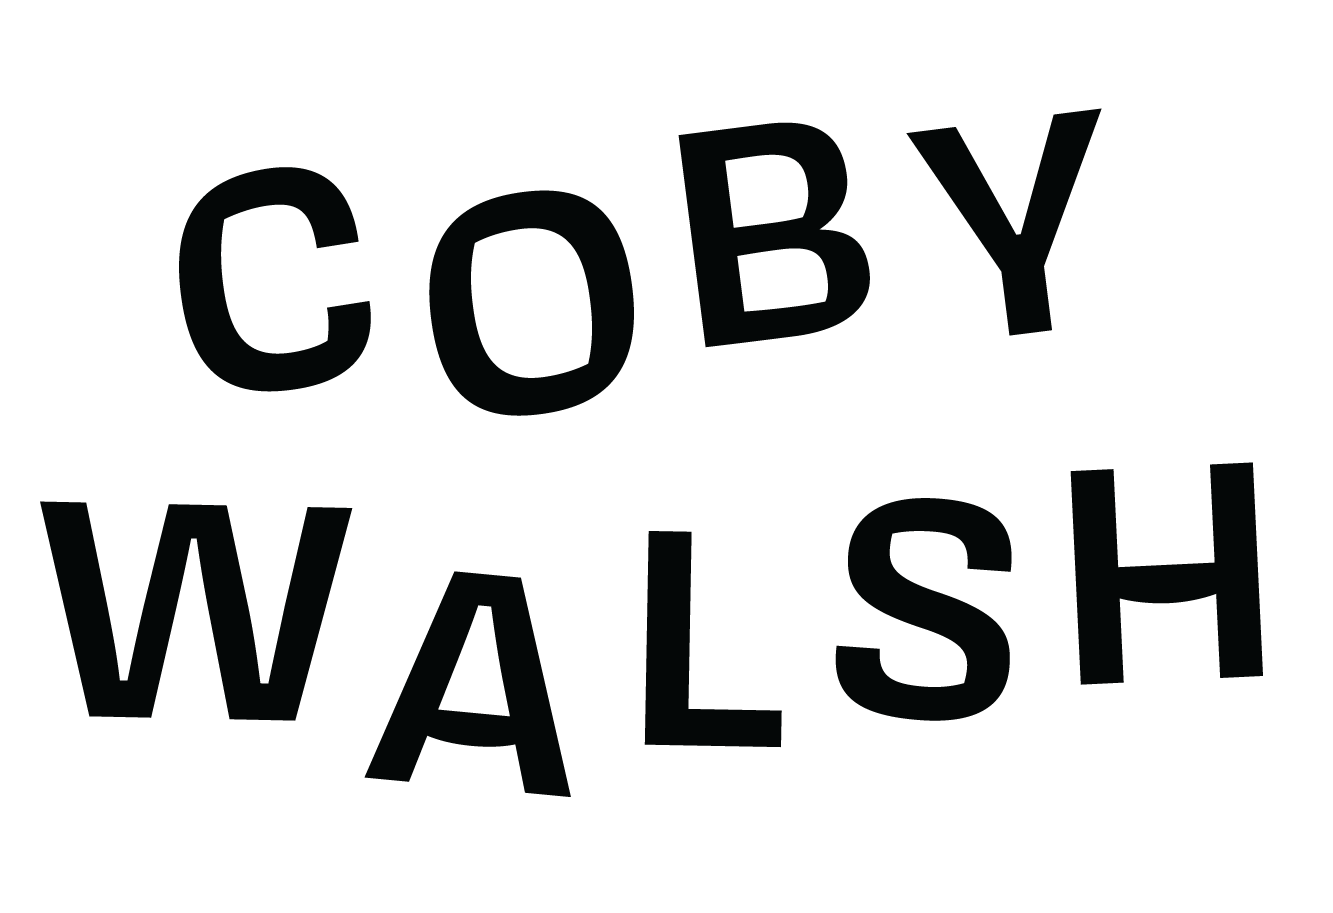 Coby Walsh